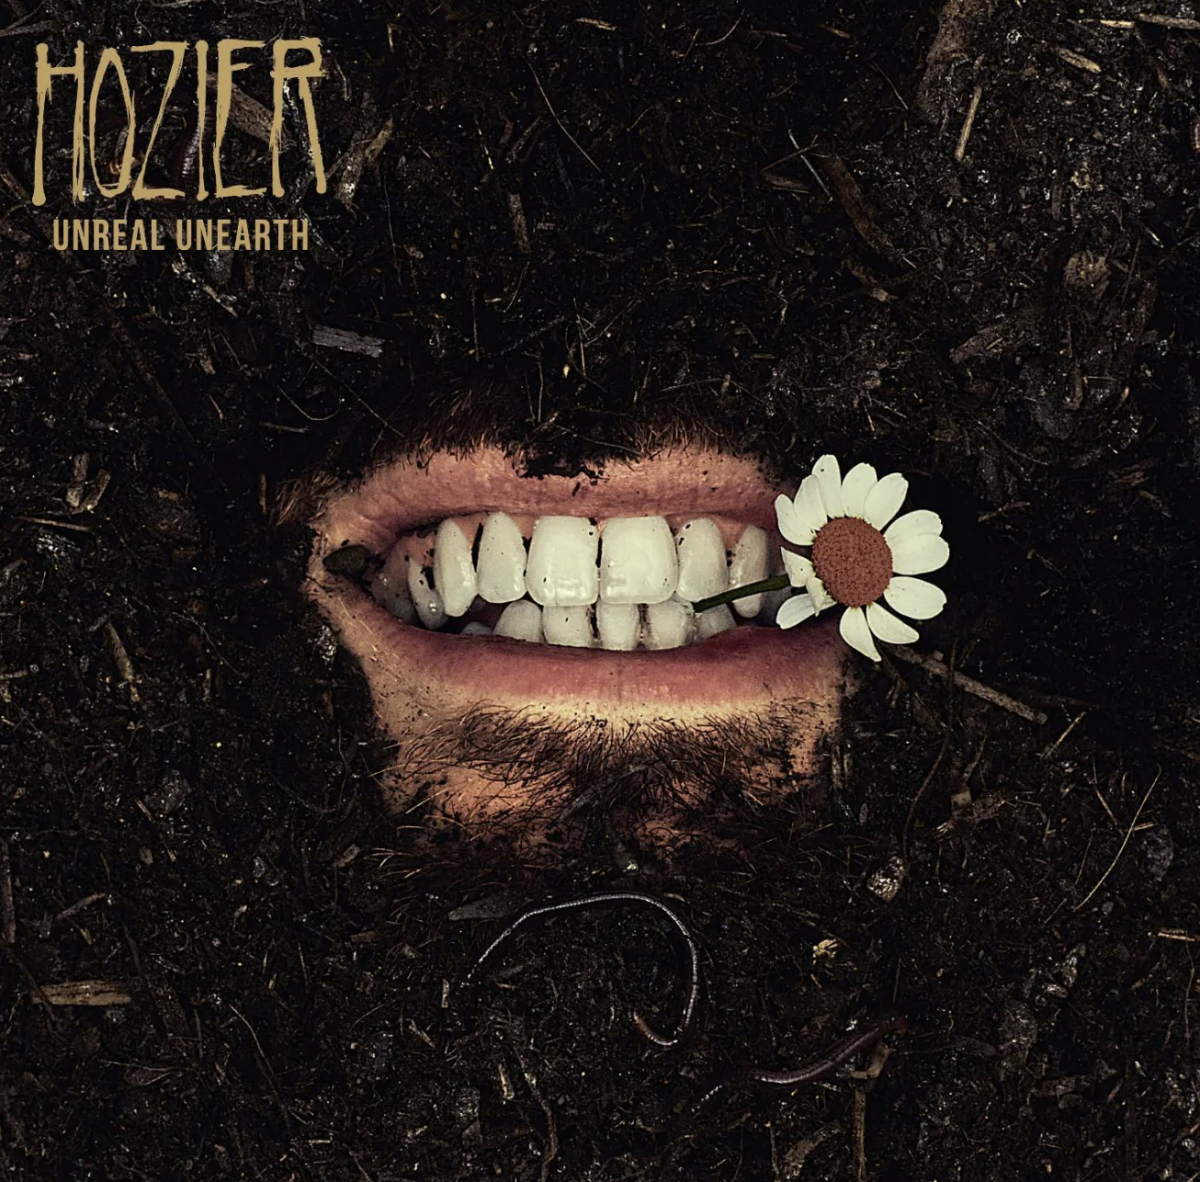 Hozier lives up to his reputation with new song. (Courtesy of Instagram)